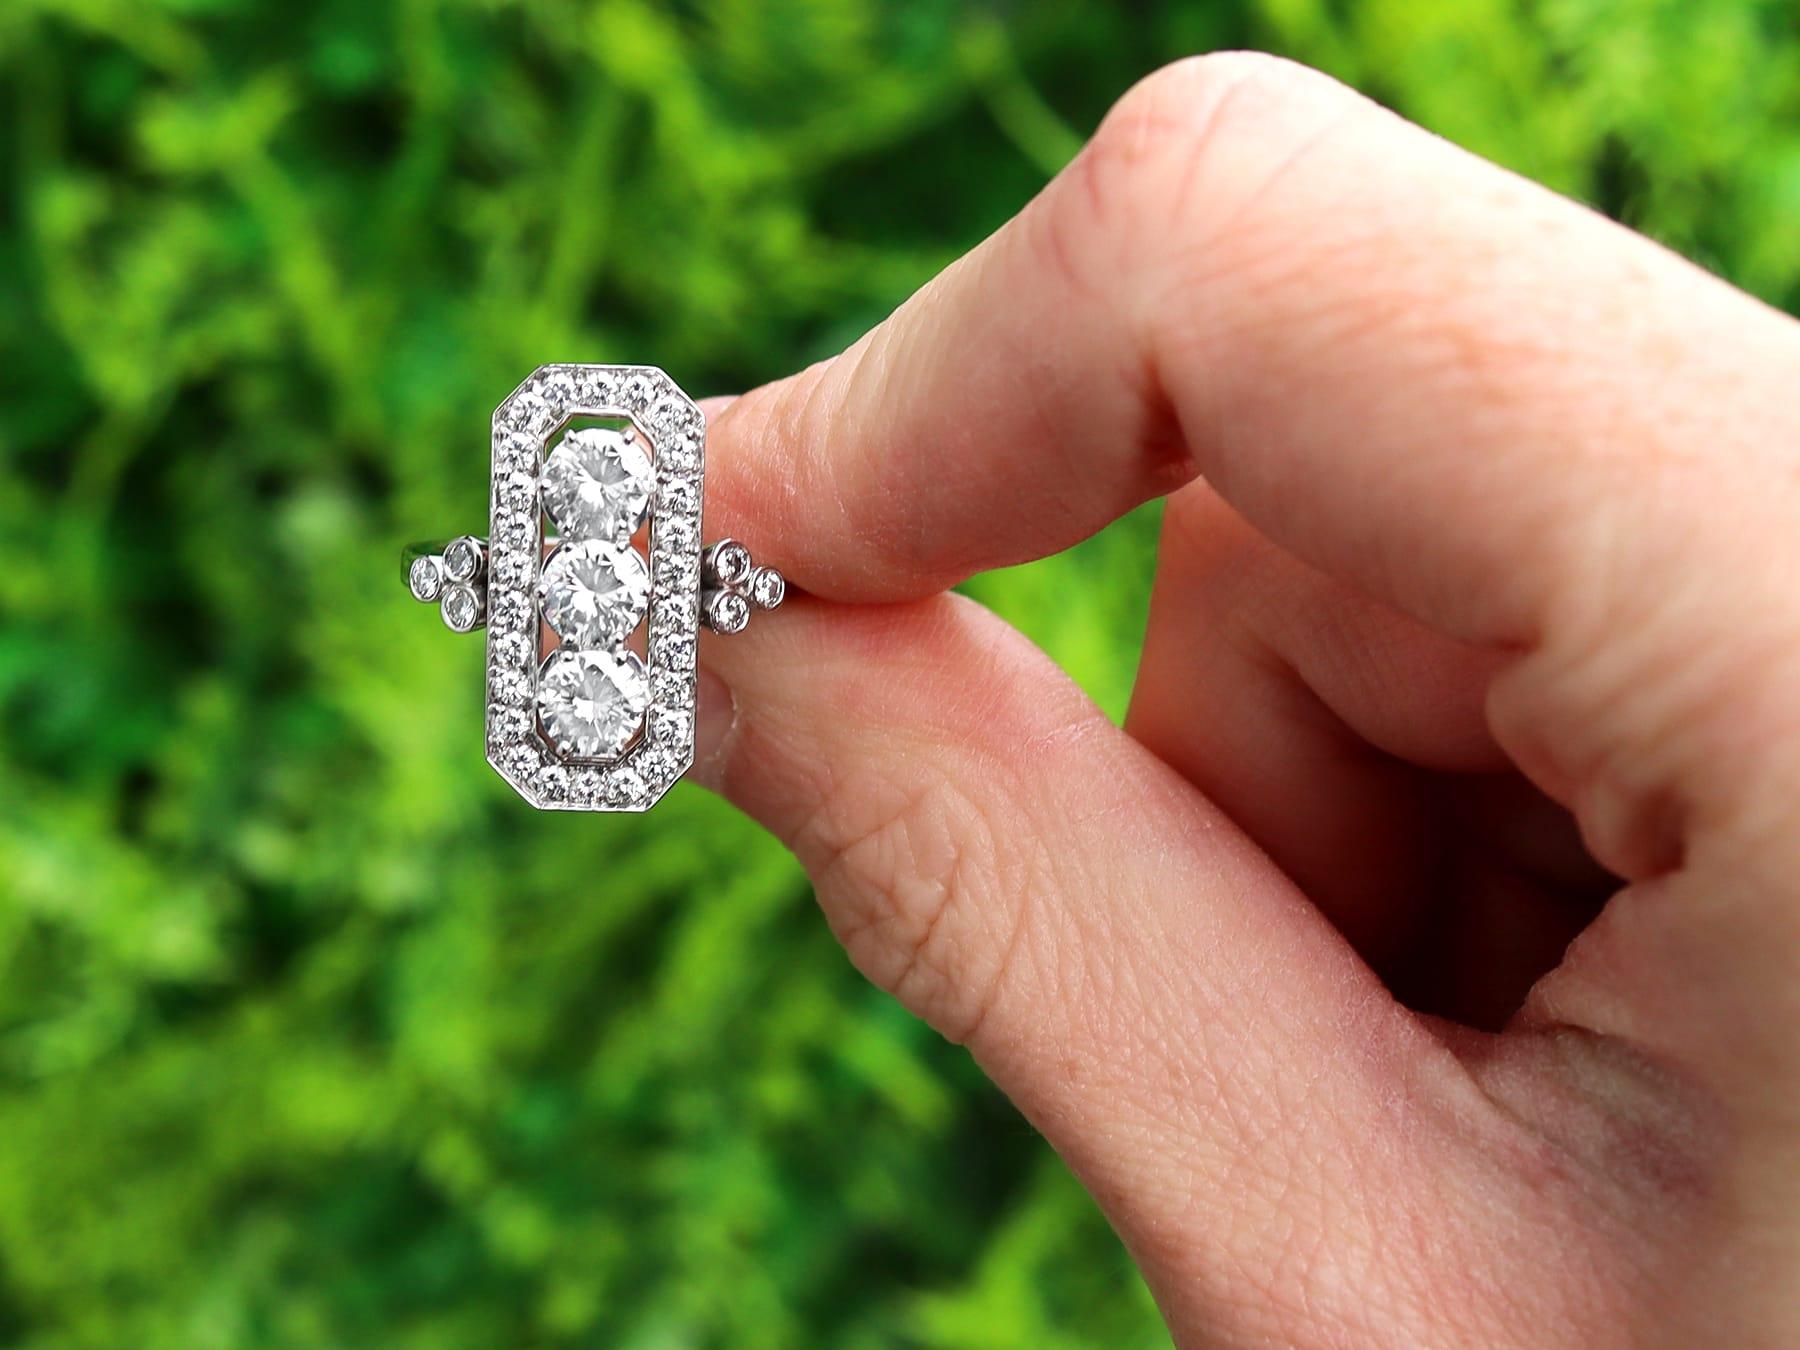 An impressive antique 1.7 carat diamond and 18 karat white gold dress ring; part of our diverse vintage jewellery and estate jewelry collections.

This stunning, fine and impressive Art Deco ring has been crafted in 18k white gold.

The pierced